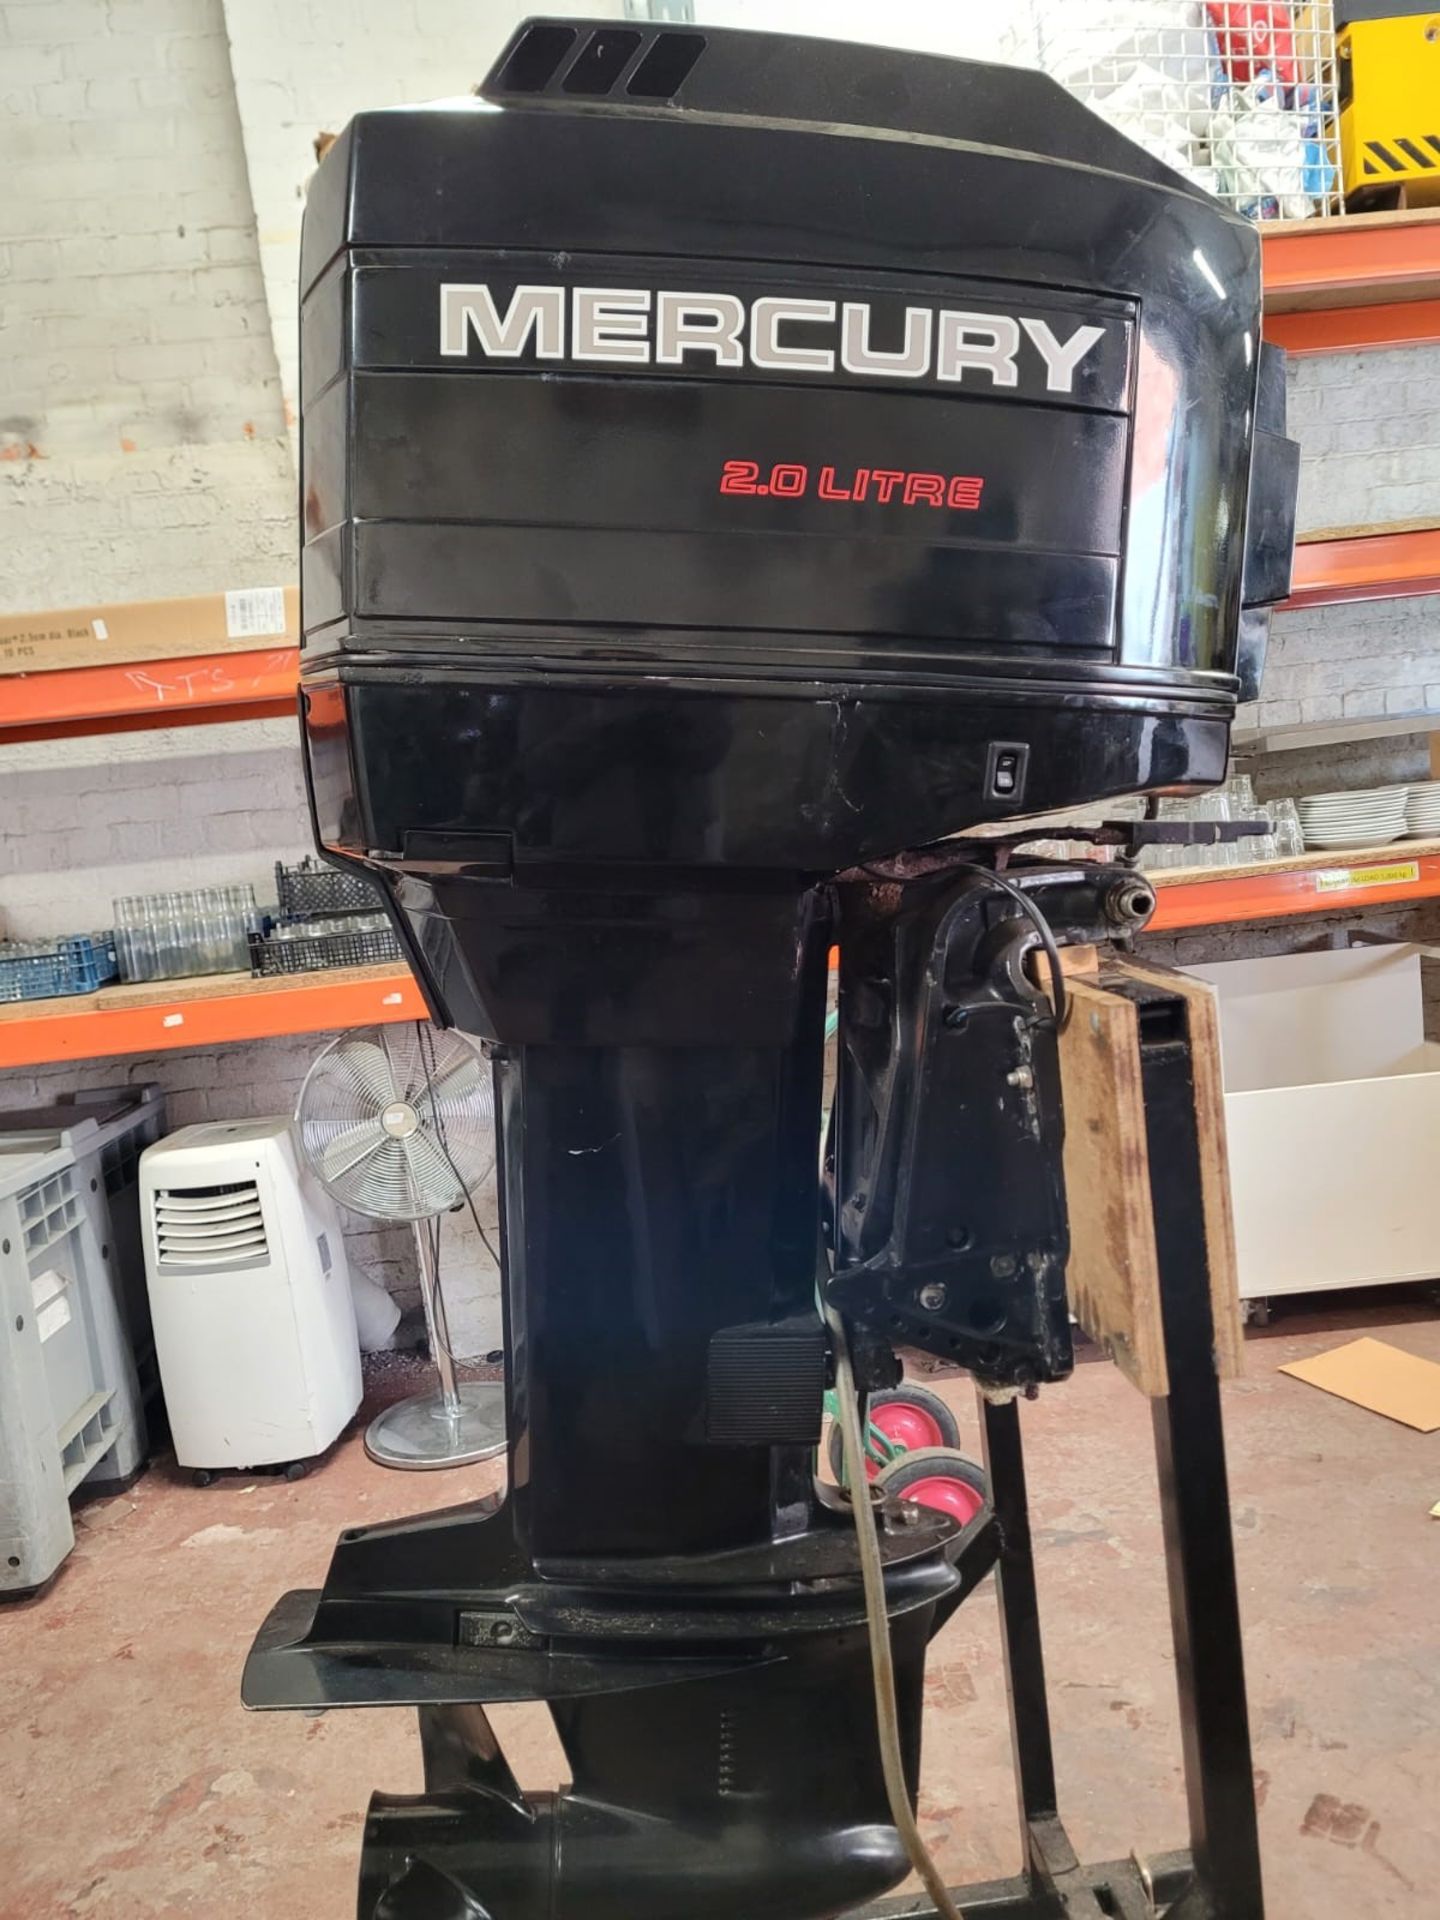 Mercury 135 Black Max 2.0L Outboard Motor and Part - Image 3 of 5